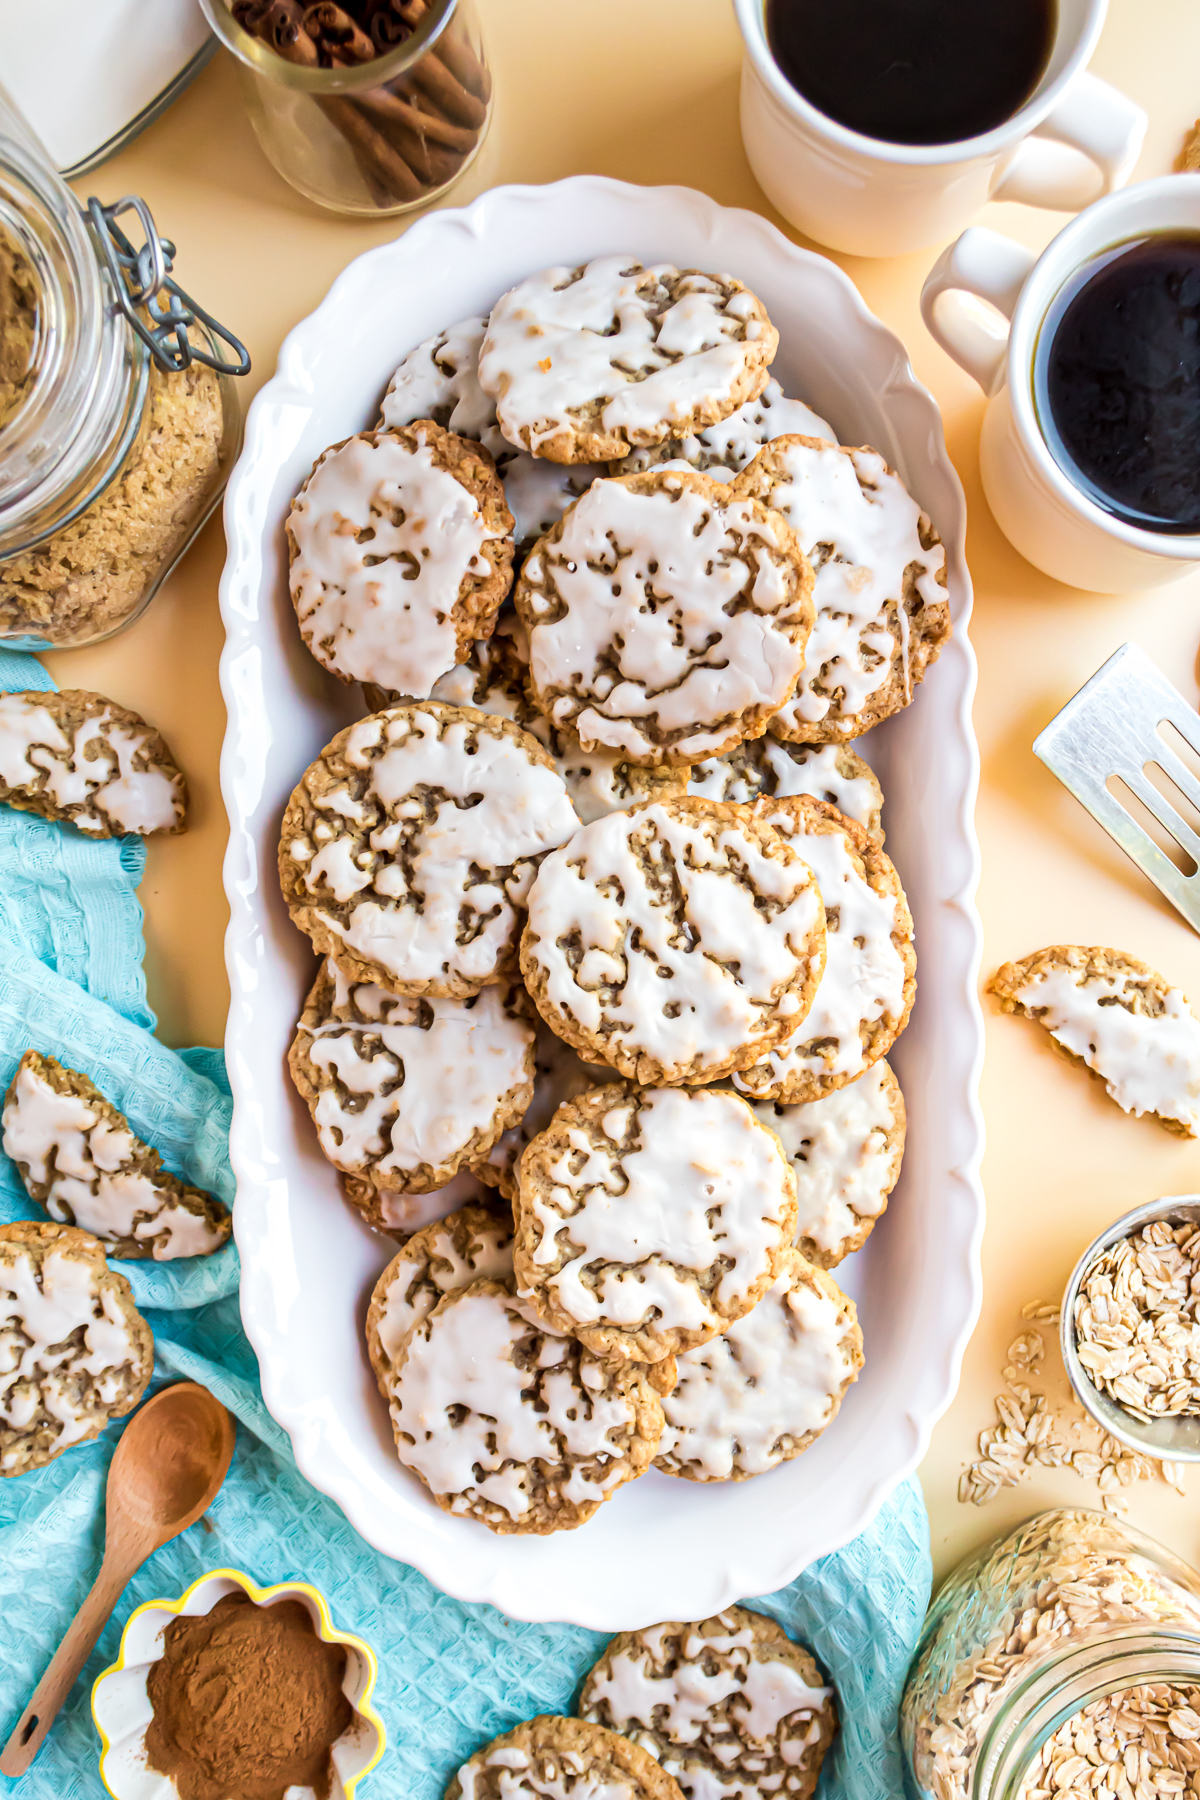 There is an arrangement of iced oatmeal cookies without egg on a white platter sitting on a yellow background with an aqua blue linen tucked under one of the edges. There are broken oatmeal cookies scattered about the surface and an open jar containing brown sugar in the upper left-hand corner. A cup of coffee, a serving spatula, a saucer of cinnamon, and a small dish of oats also frame the serving dish.